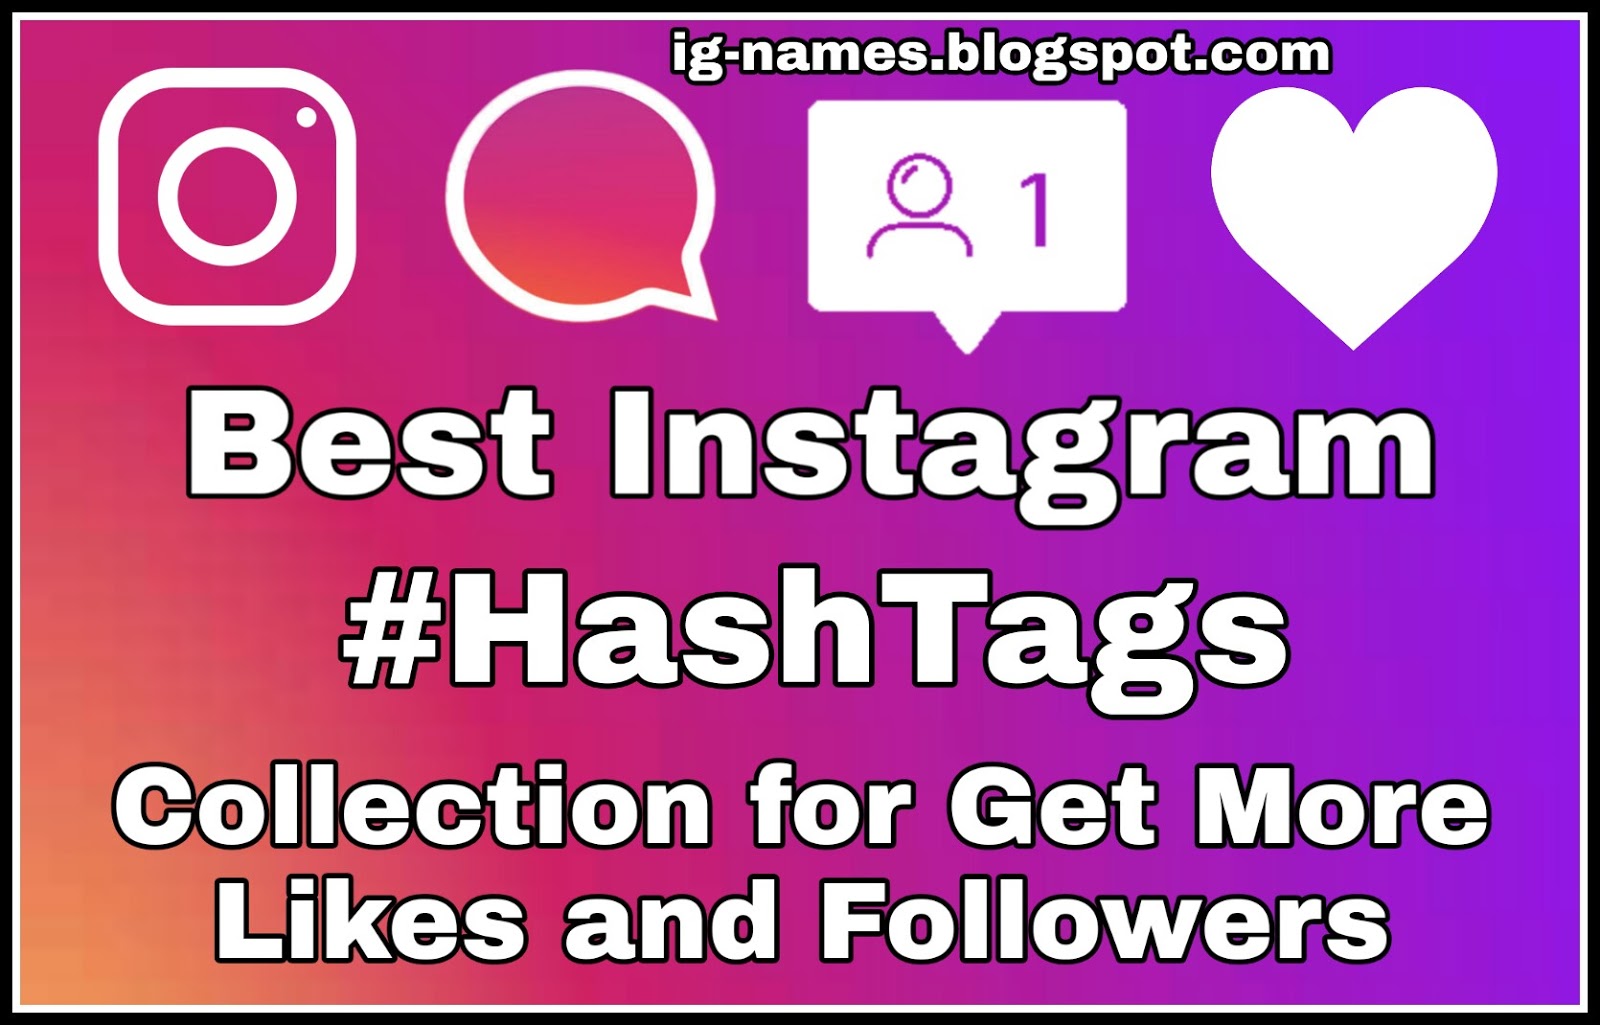  - best instagram hashtags to get likes and followers